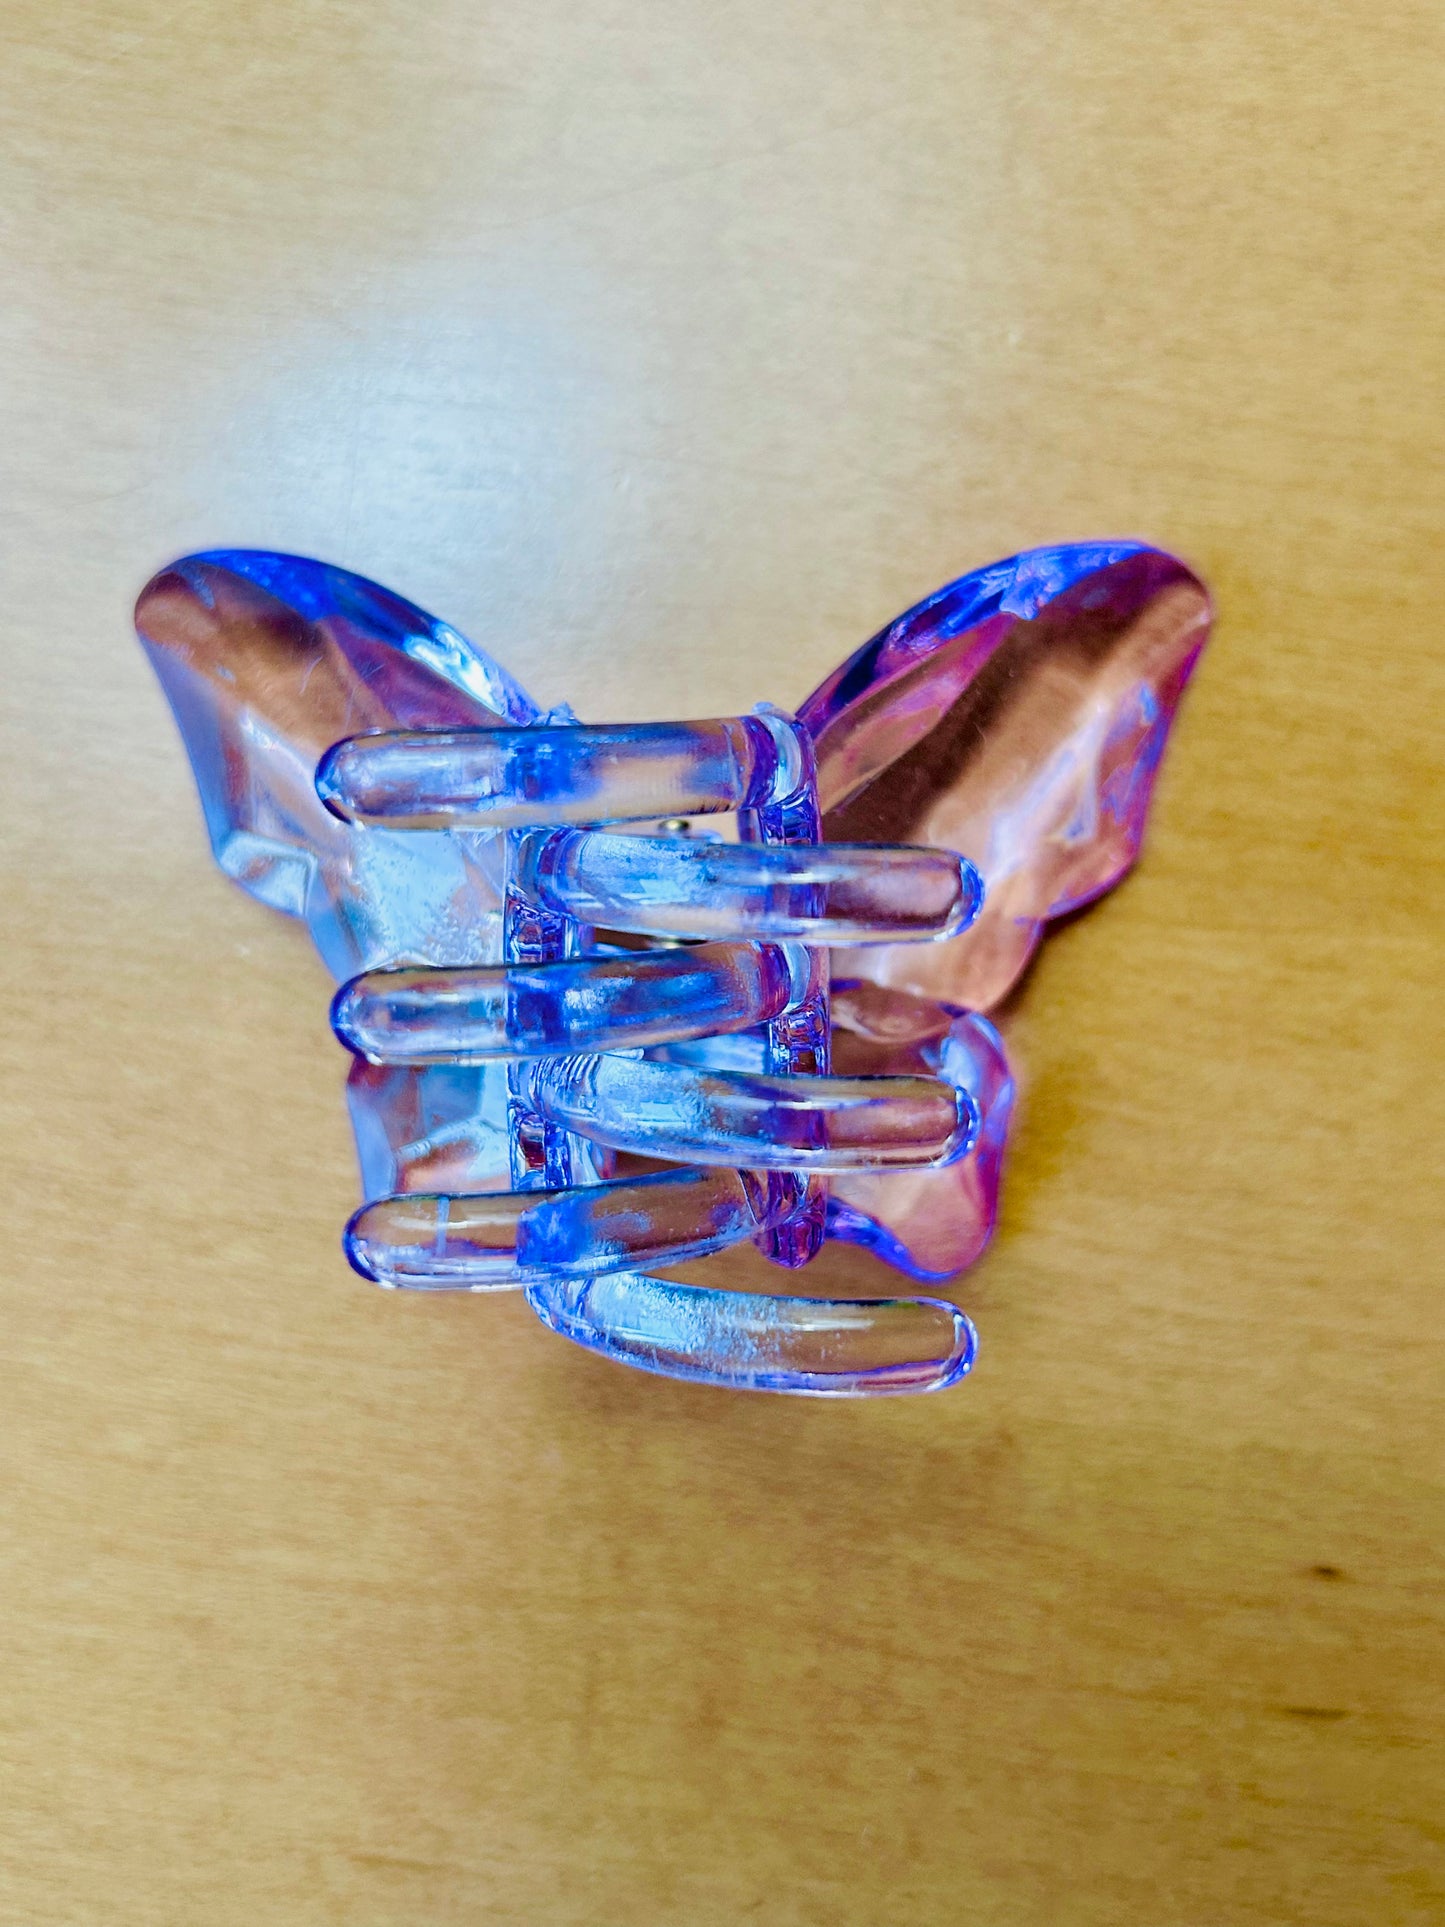 Acrylic Butterfly Clips